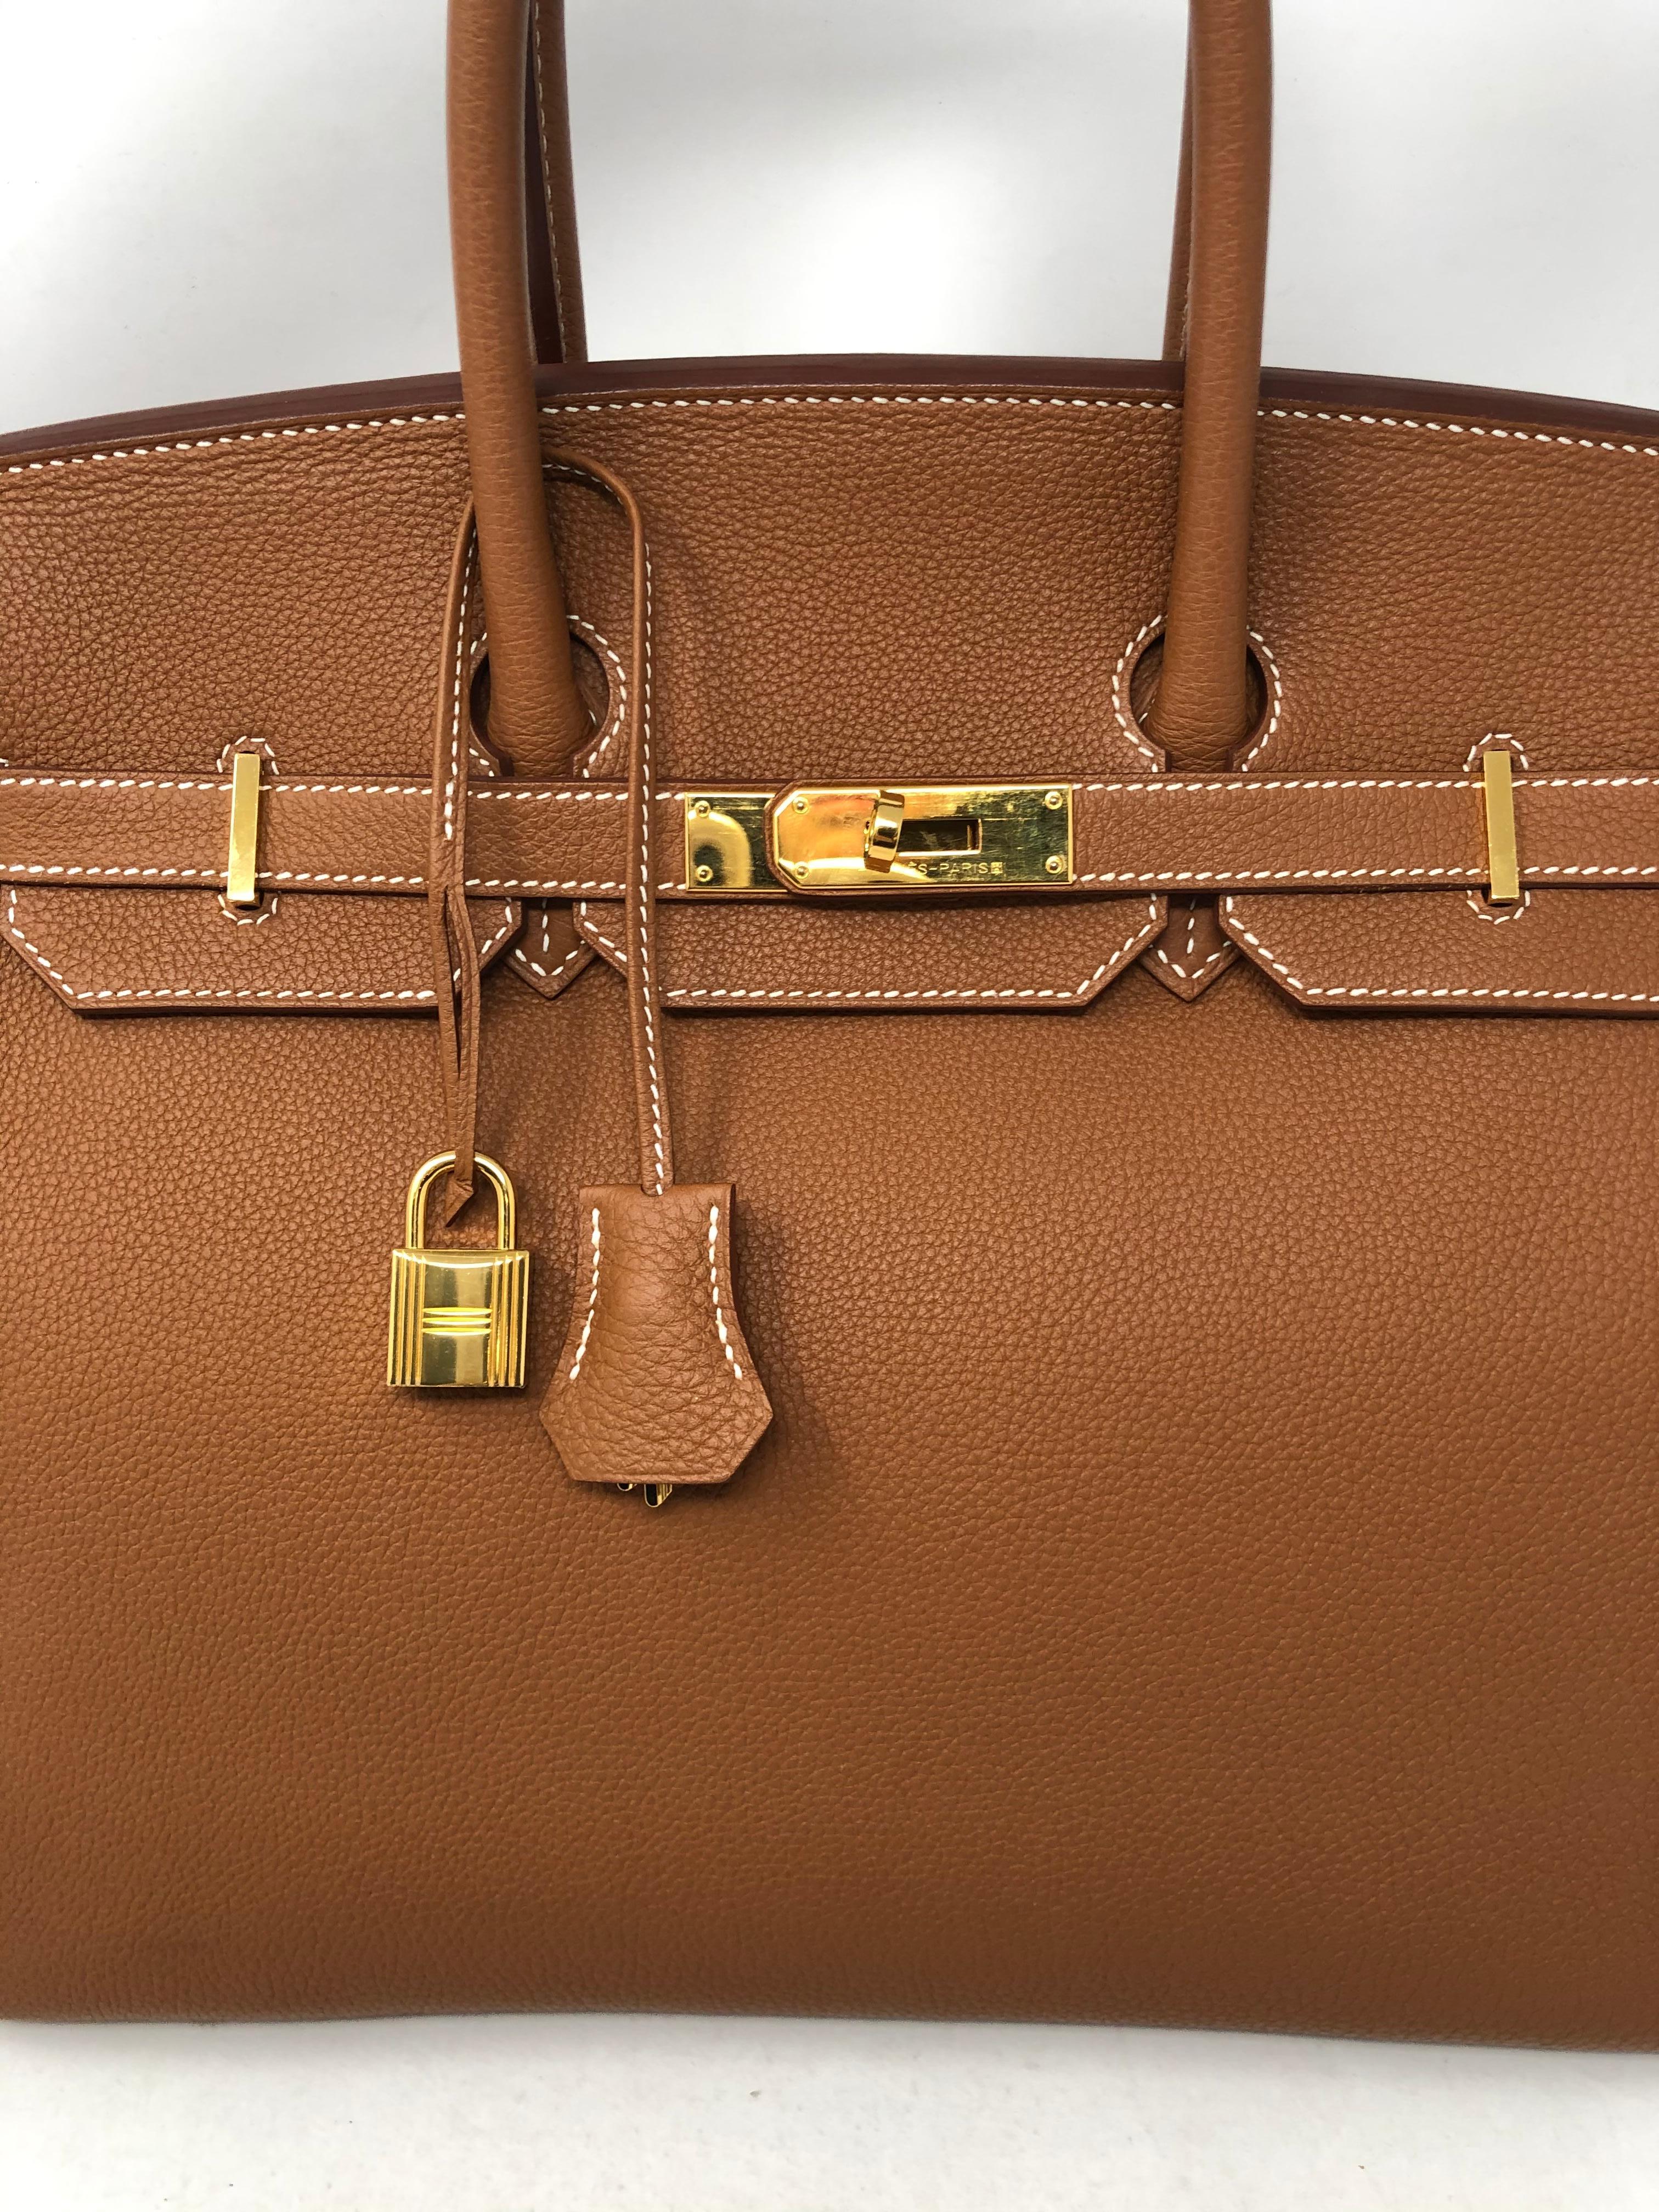 Hermes Gold Birkin 35 in Togo Leather. Gold color with gold hardware. The most wanted combination. Purchased 2016-2017. Looks brand new. Kept in Hermes box. Beautiful togo leather and stored correctly. Includes clochette, lock and keys. Hermes Dust